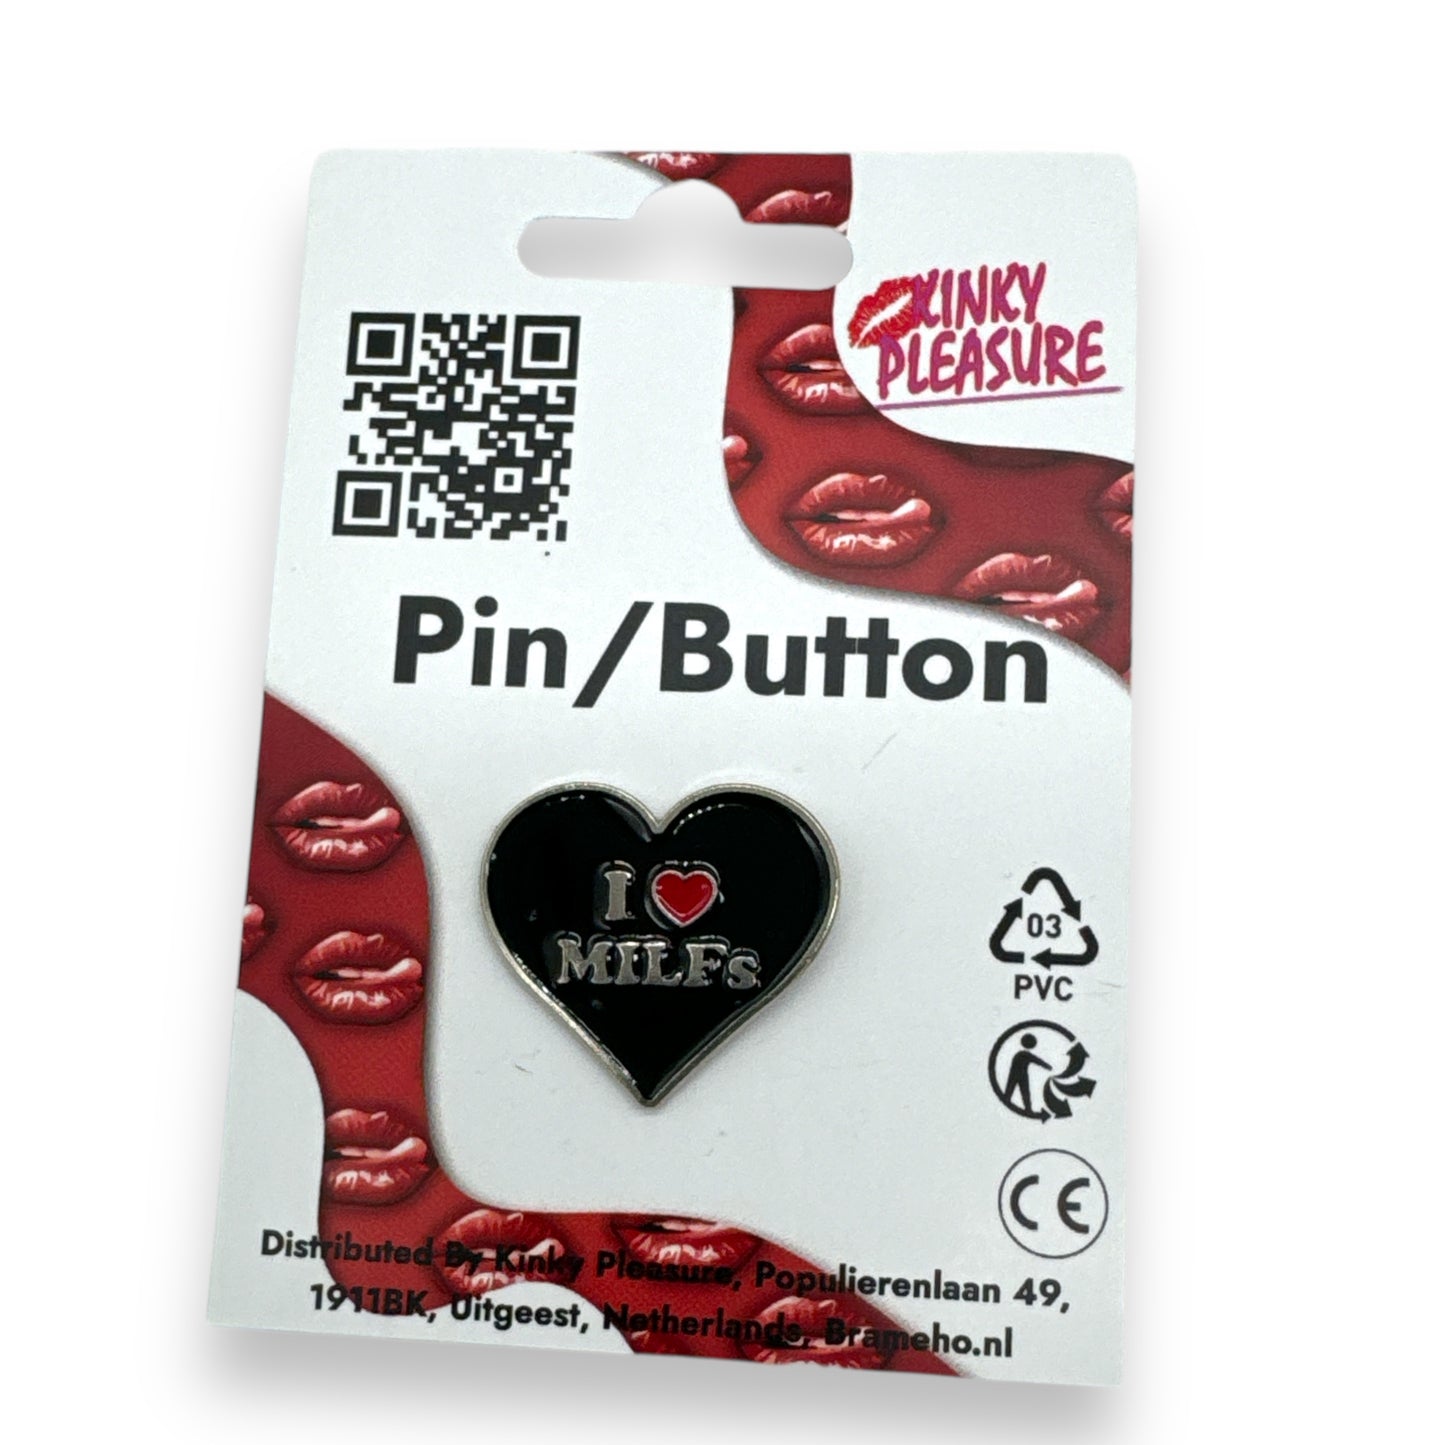 Kinky Pleasure - B098 - Item Stand Display Badges Pin/Buttons 30 Pieces - incl Display